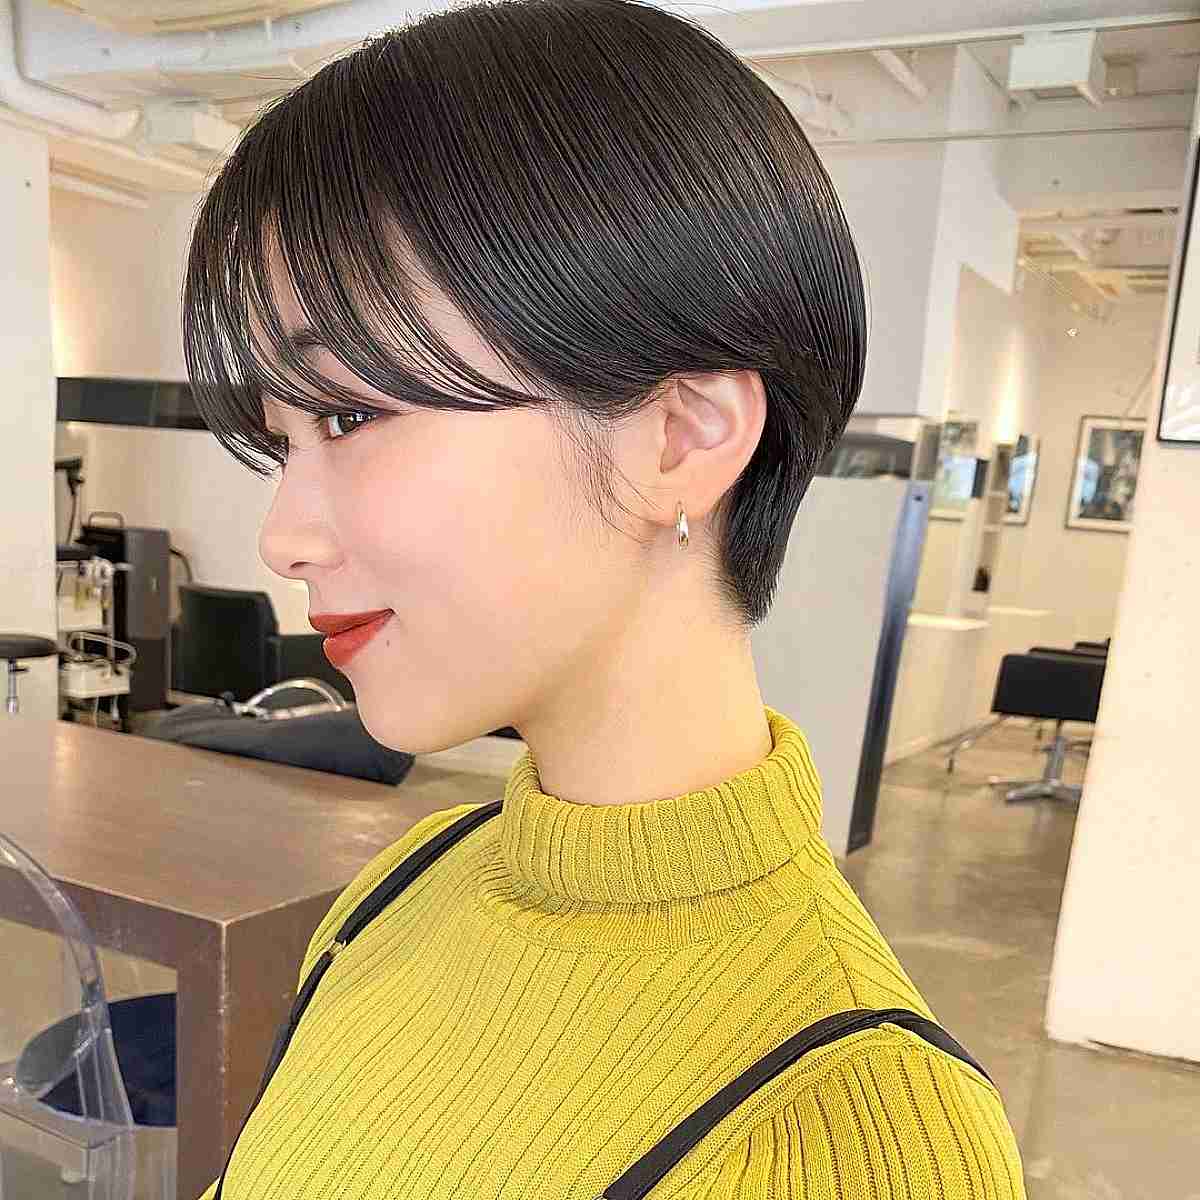 Sleek Pixie Cut with See-Through Bangs for Girls